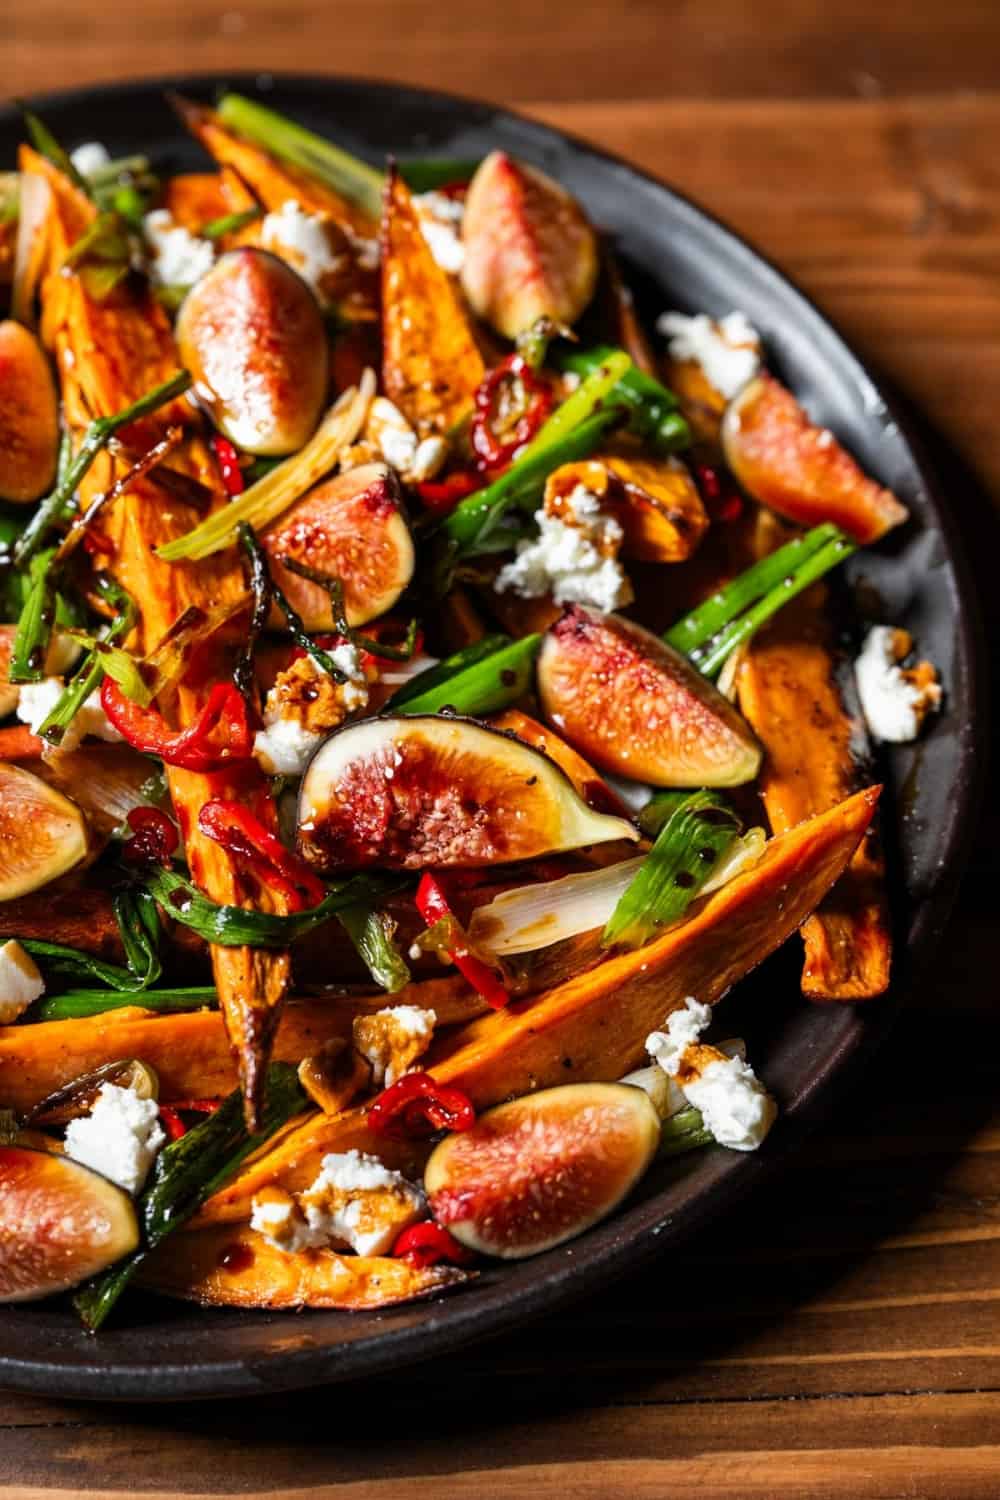 Roasted Sweet Potatoes with Scallions, Fresno Chili and Figs - close up image on plat